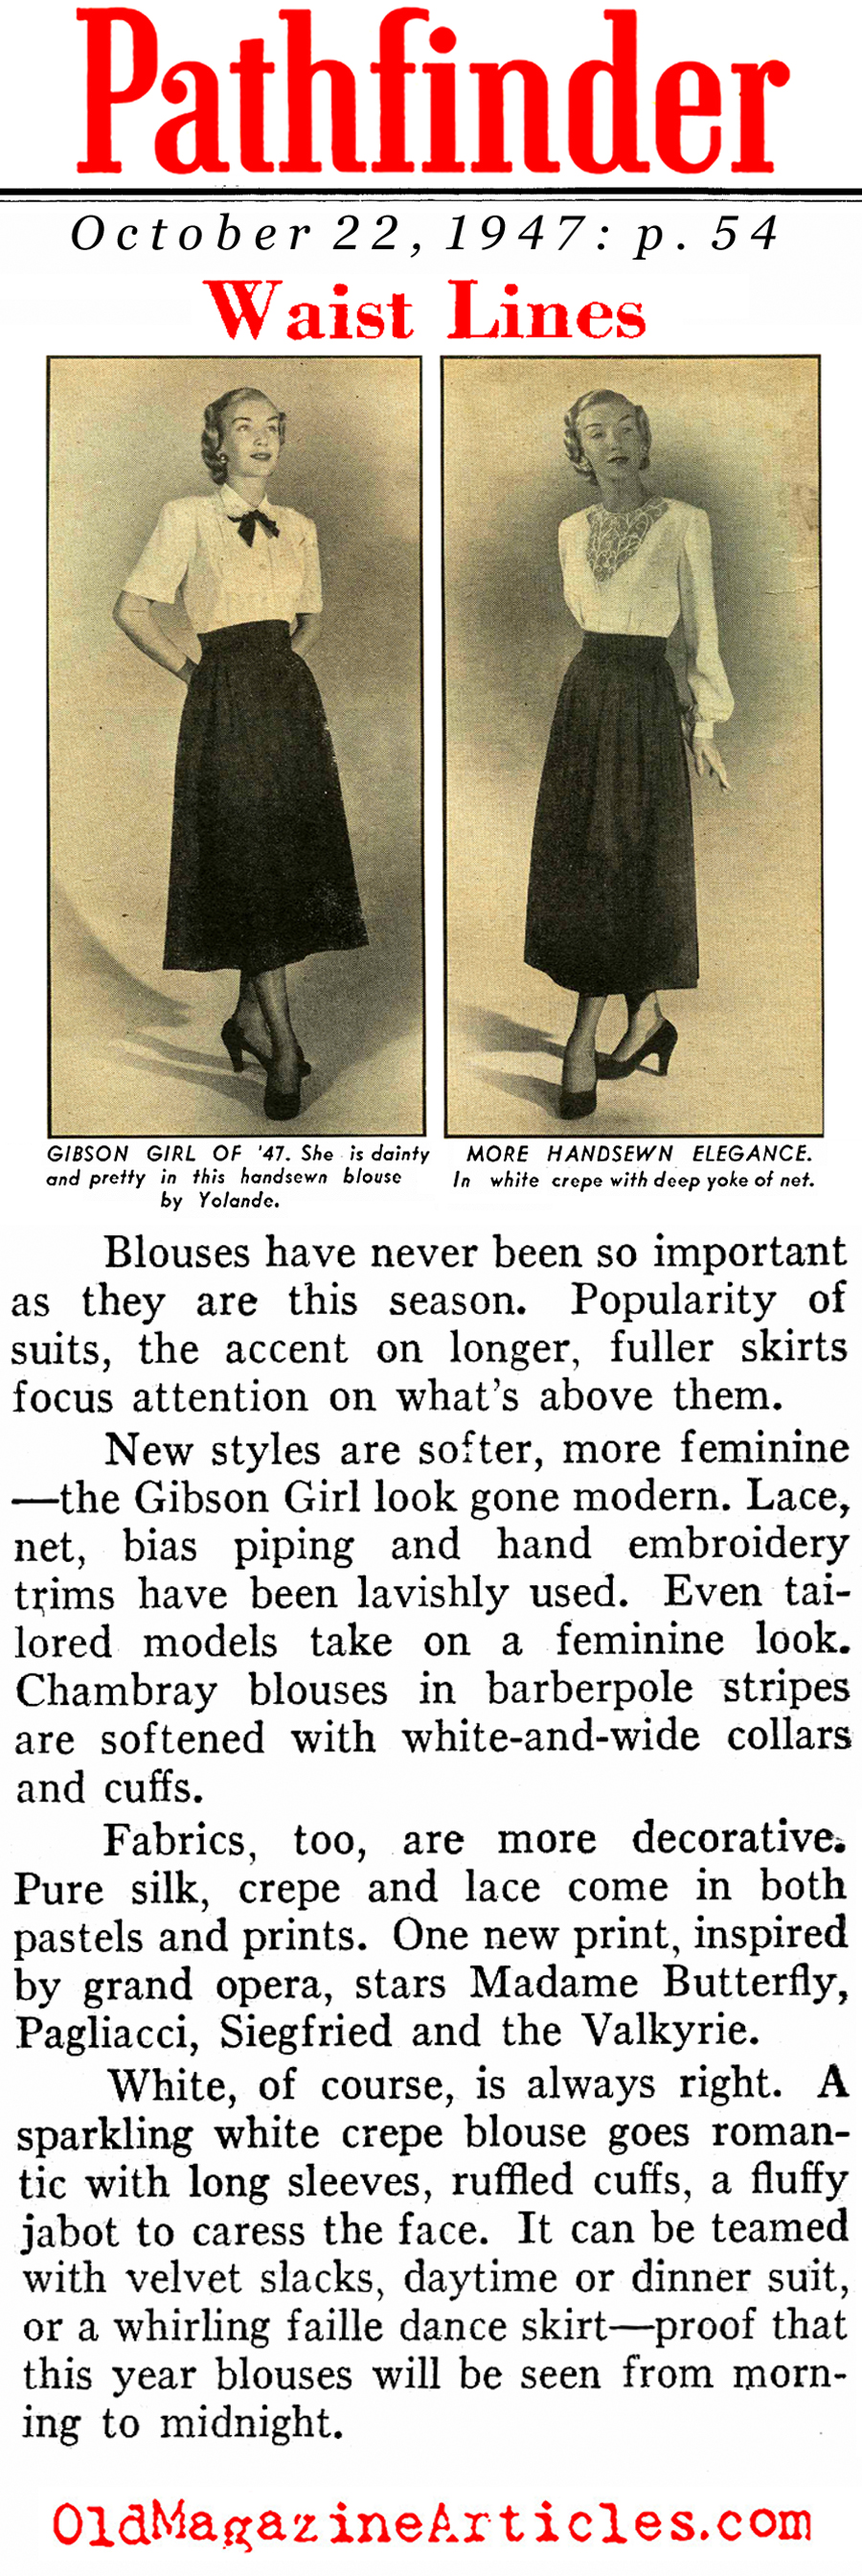 Thoughts on Blouses (Pathfinder Magazine, 1947)